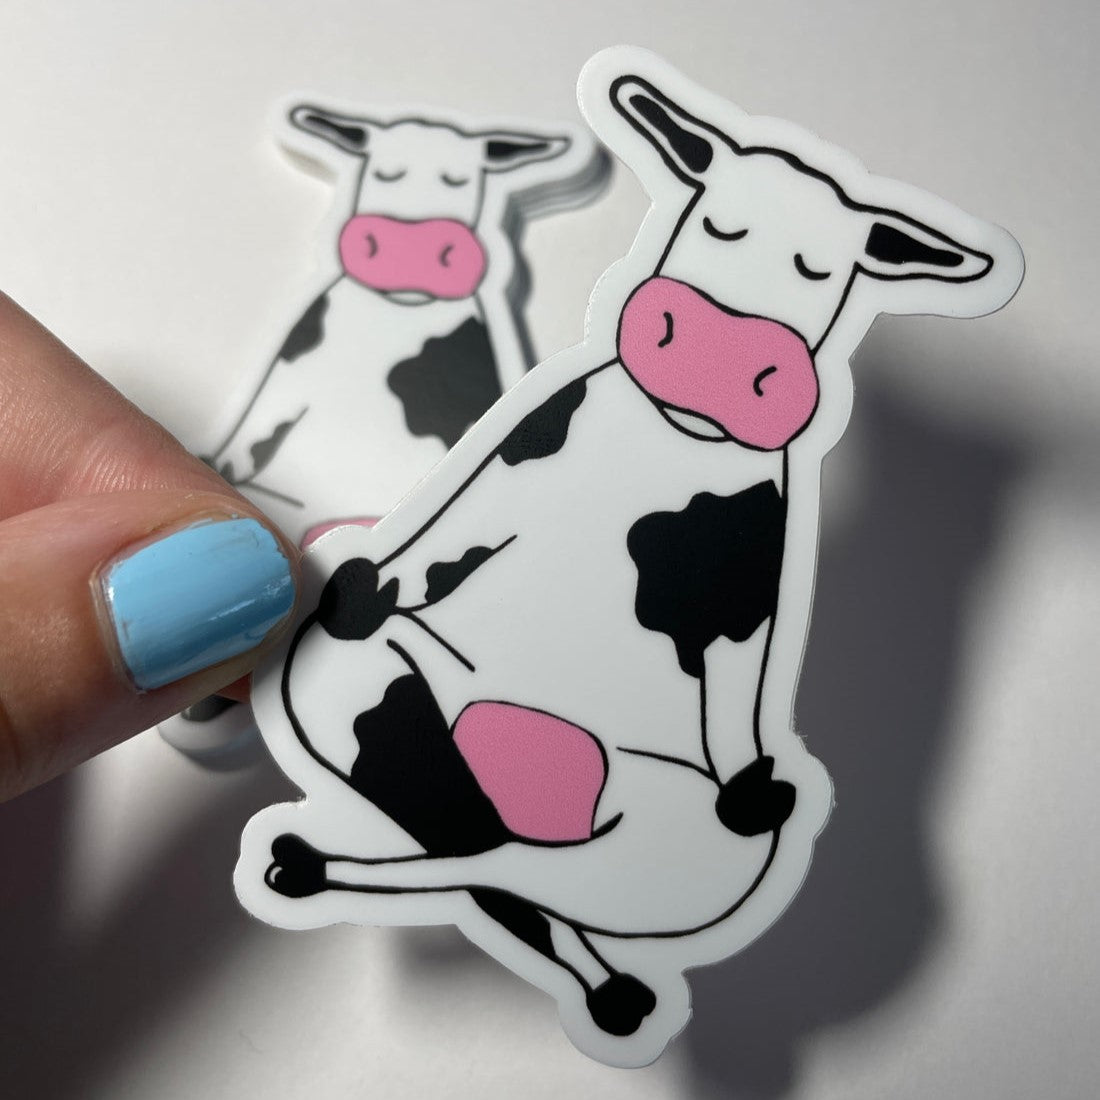 Stickers by Quirky Burp